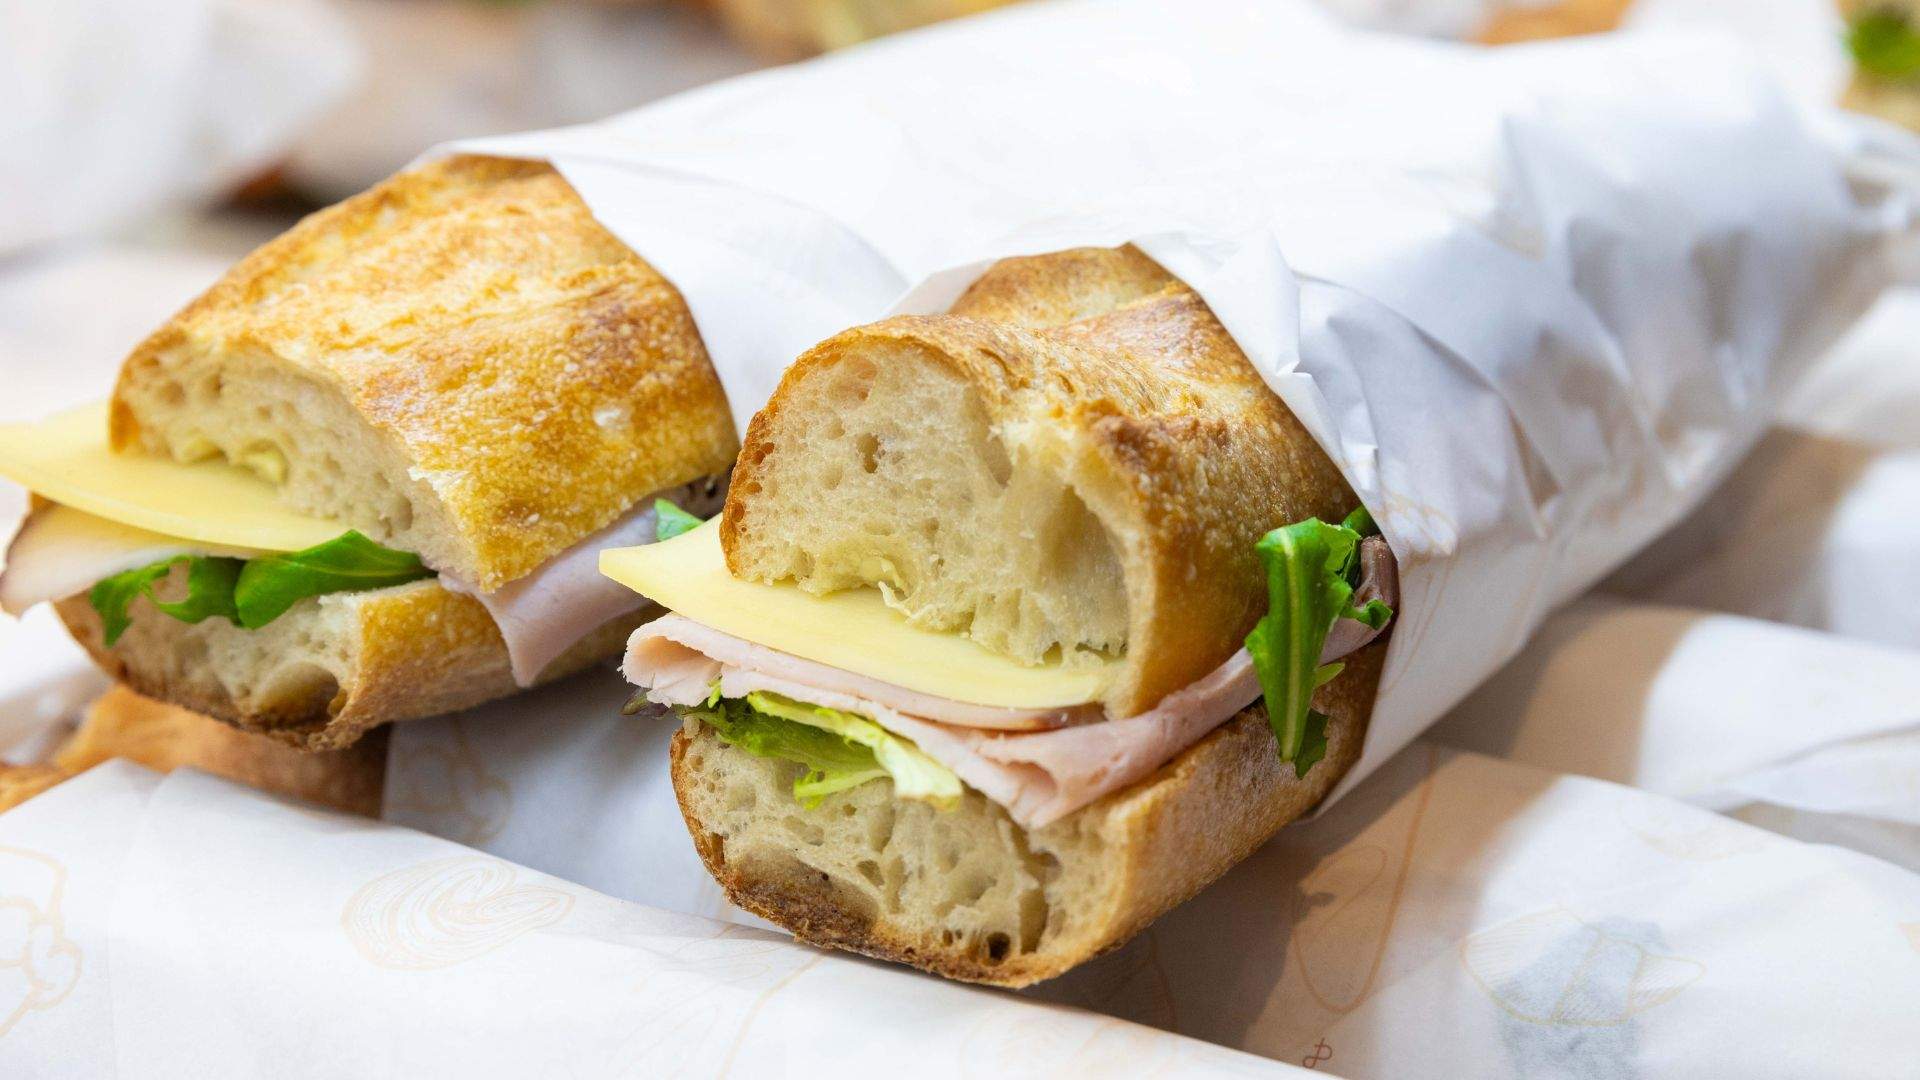 Baguette Sandwiches from Frenchies Bakery & Pâtisserie in Rosebery.